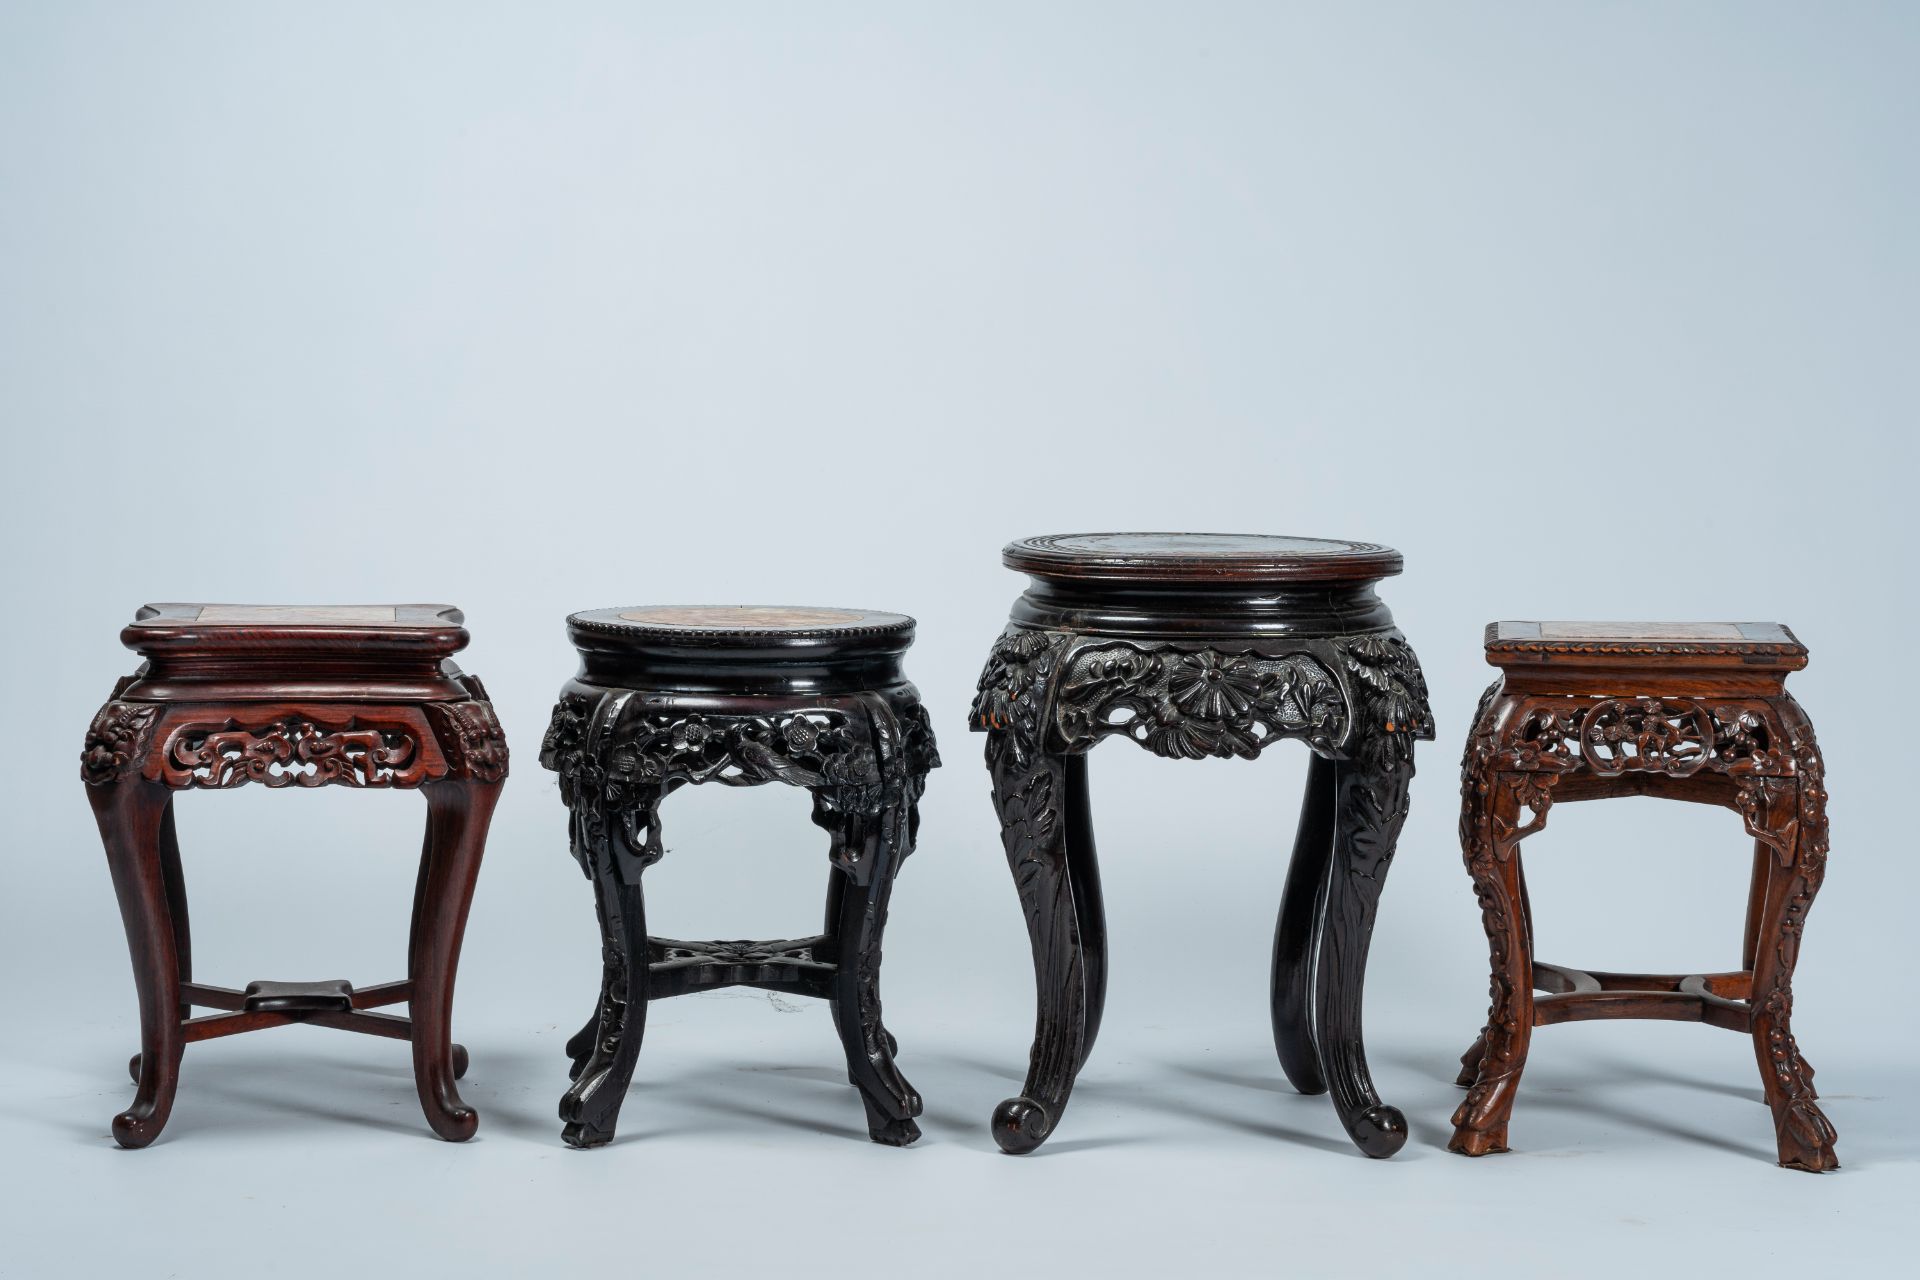 Four Chinese and Japanese open worked carved wood stands with marble and wood top, 20th C. - Image 3 of 7